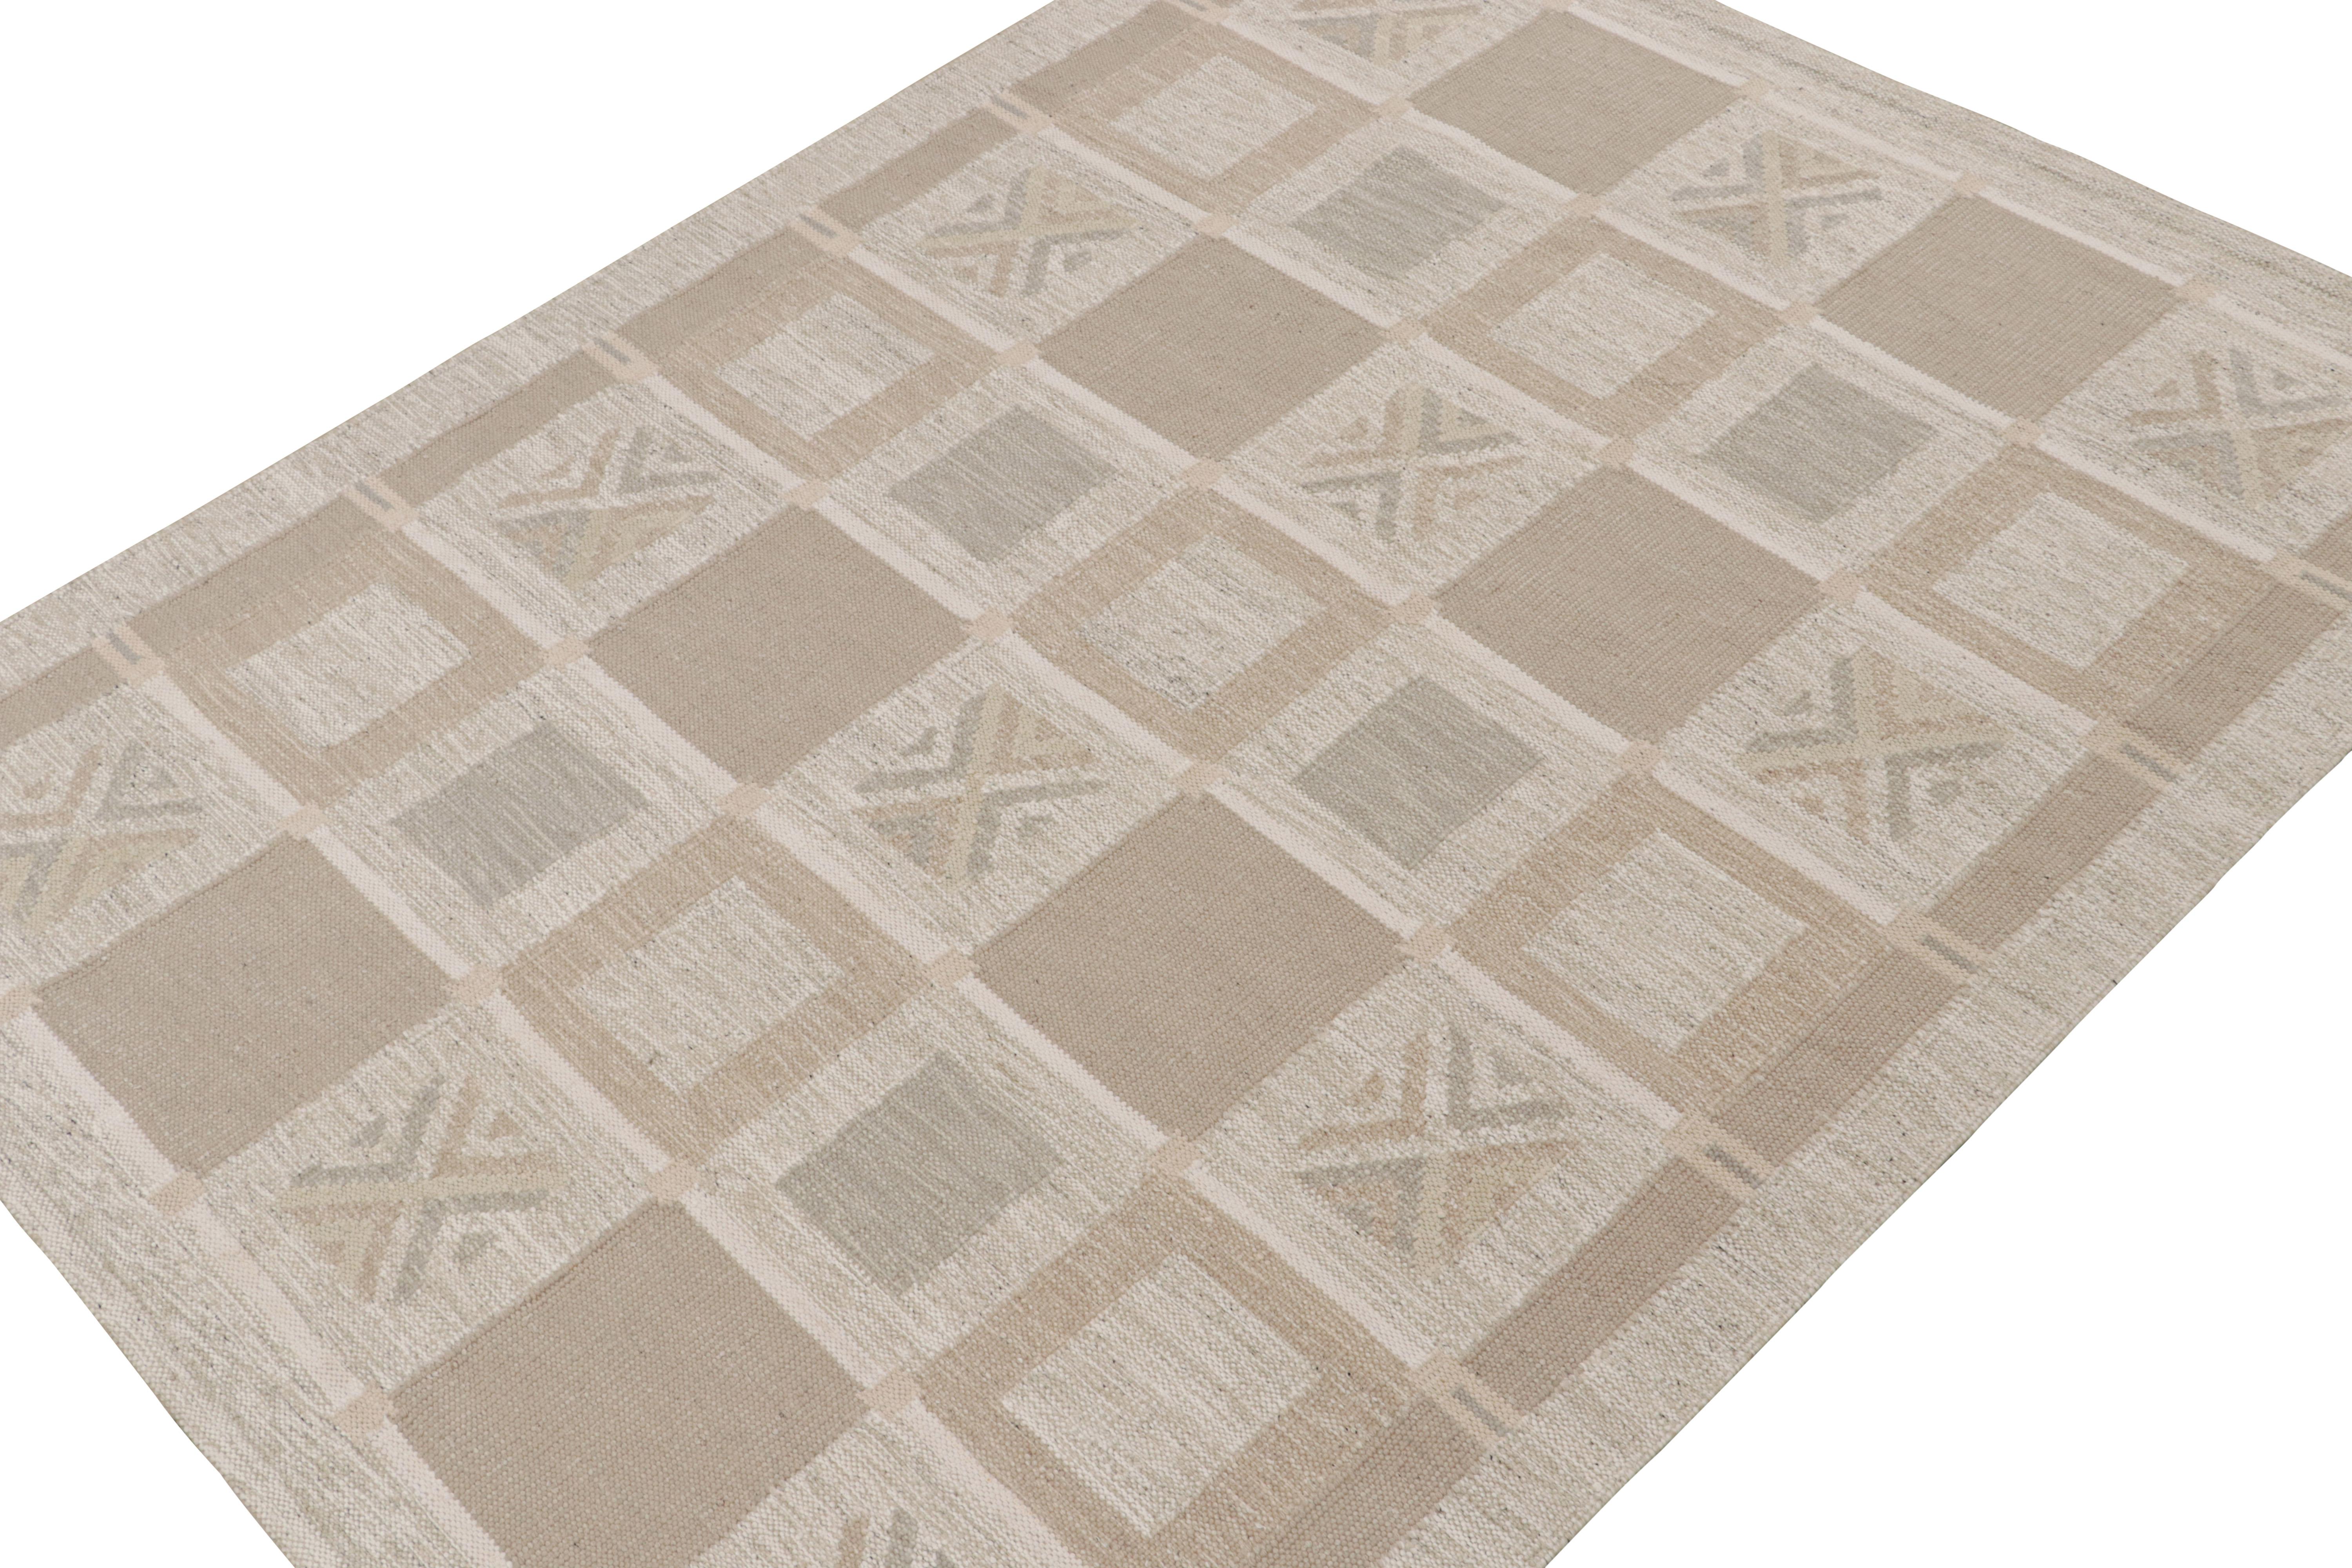 A smart 8x10 Swedish style custom kilim from our award-winning Scandinavian flat weave collection. Handwoven in wool & undyed natural yarn.

On the Design: 

This rug enjoys geometric patterns in comfortable brown, white & gray. Keen eyes will